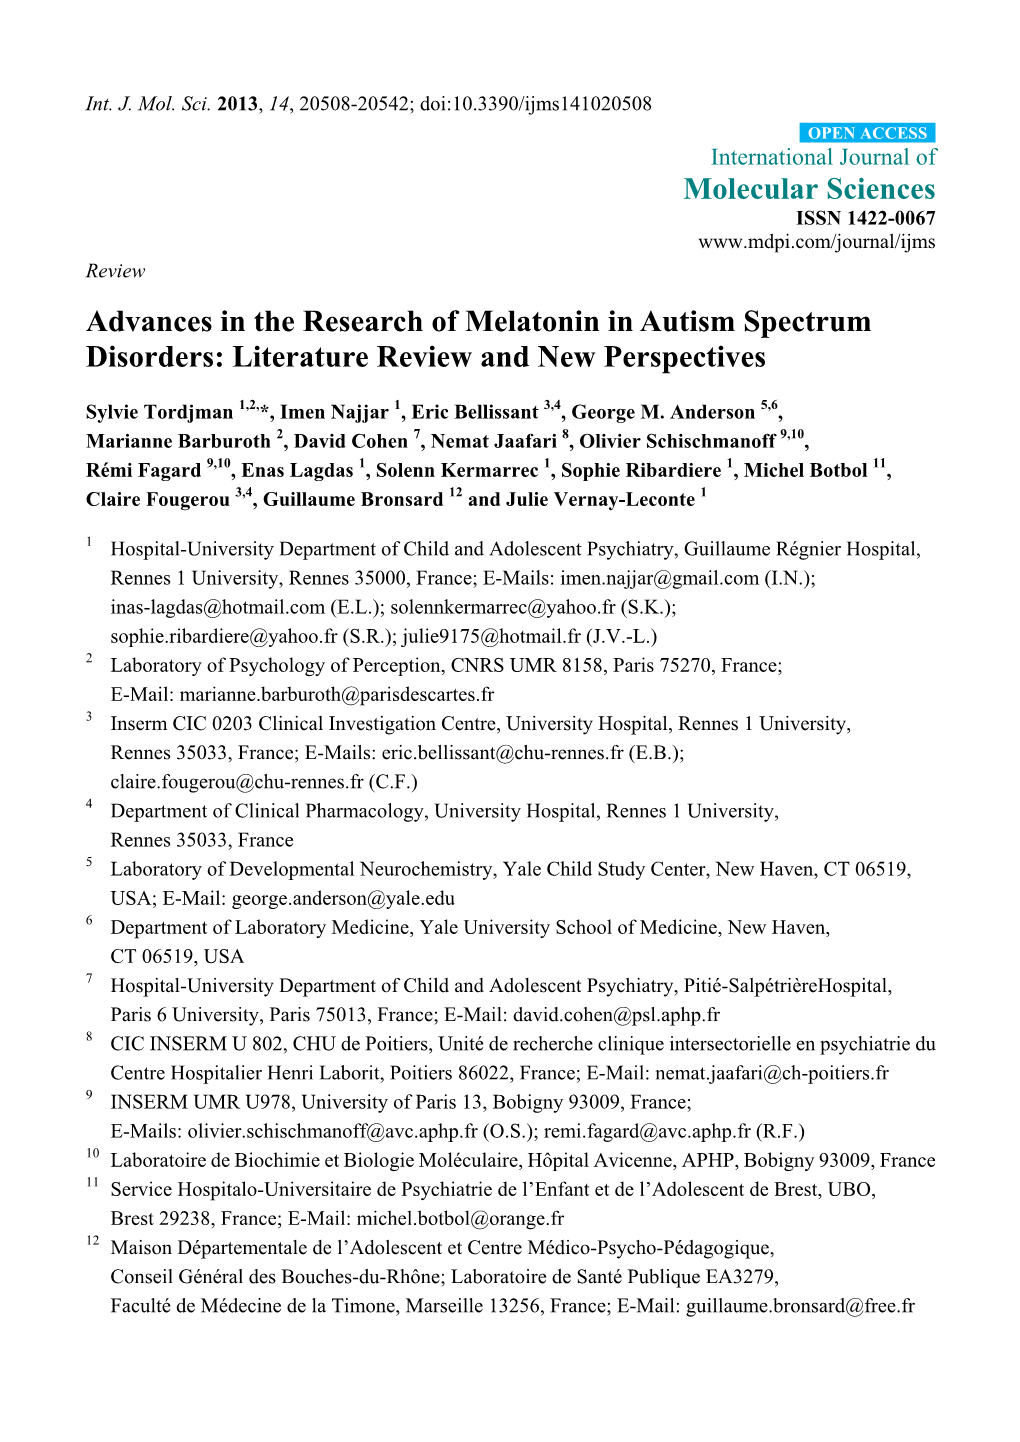 Advances in the Research of Melatonin in Autism Spectrum Disorders: Literature Review and New Perspectives